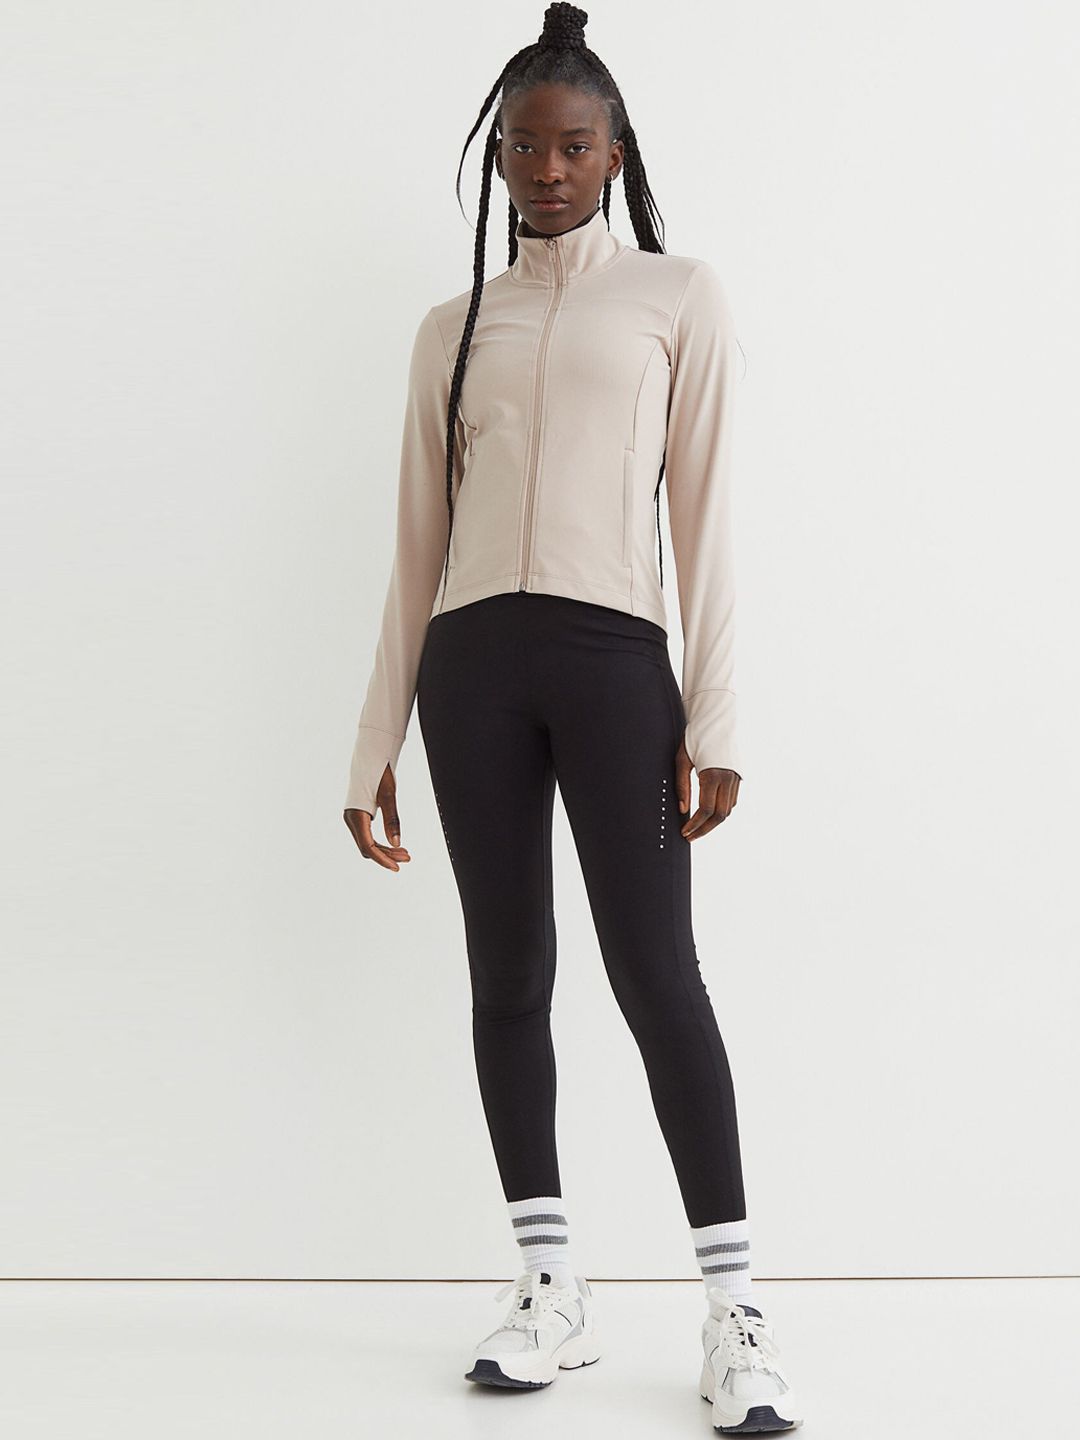 H&M Women Black Solid High Waist Running Tights Price in India